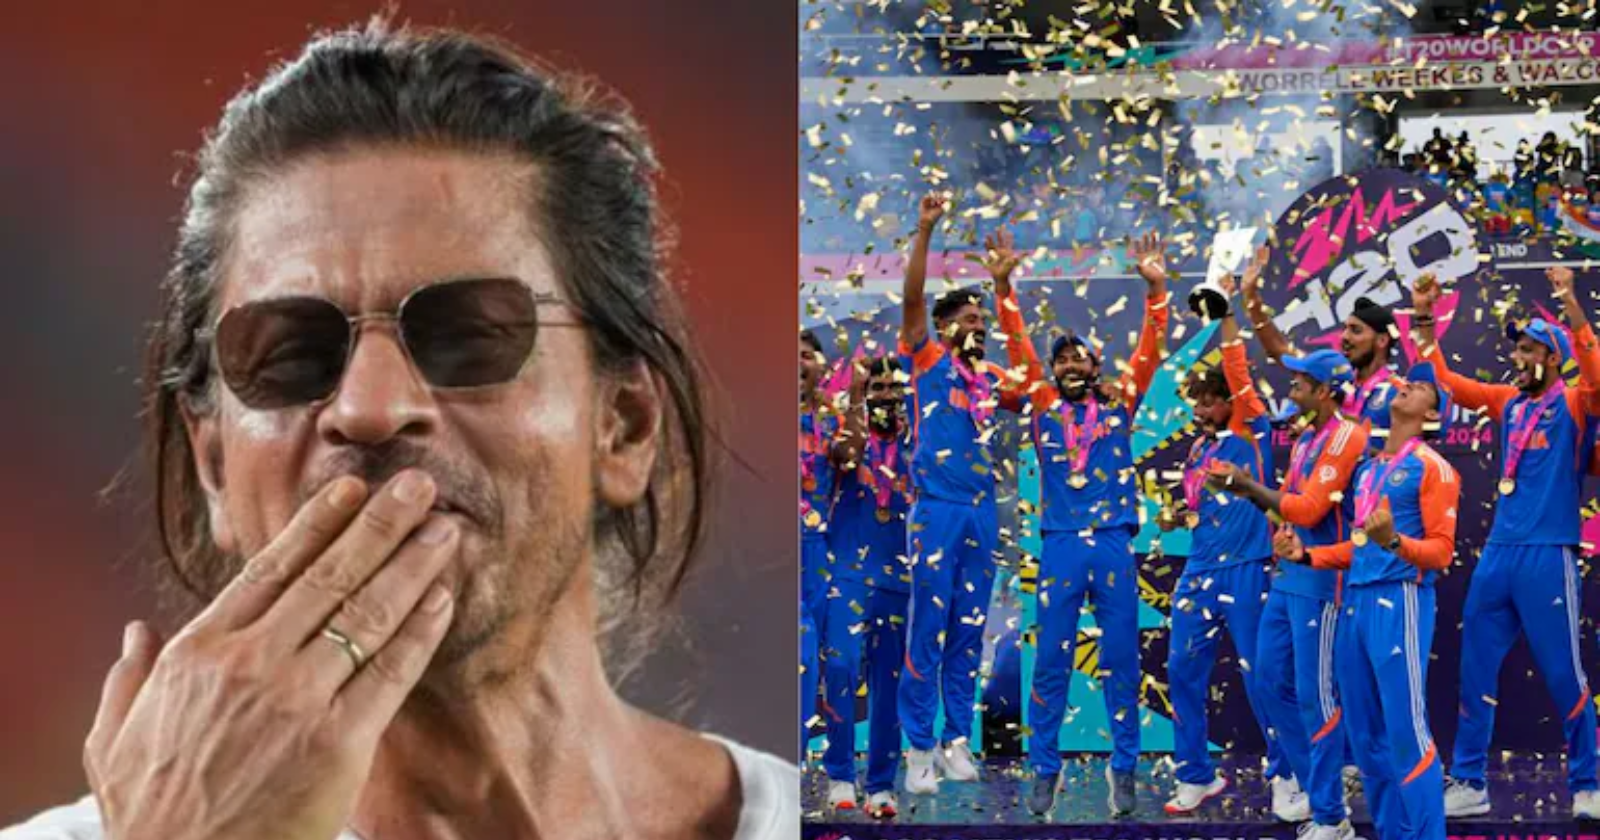 Shah Rukh Khan Shares Emotional Note for Team India After